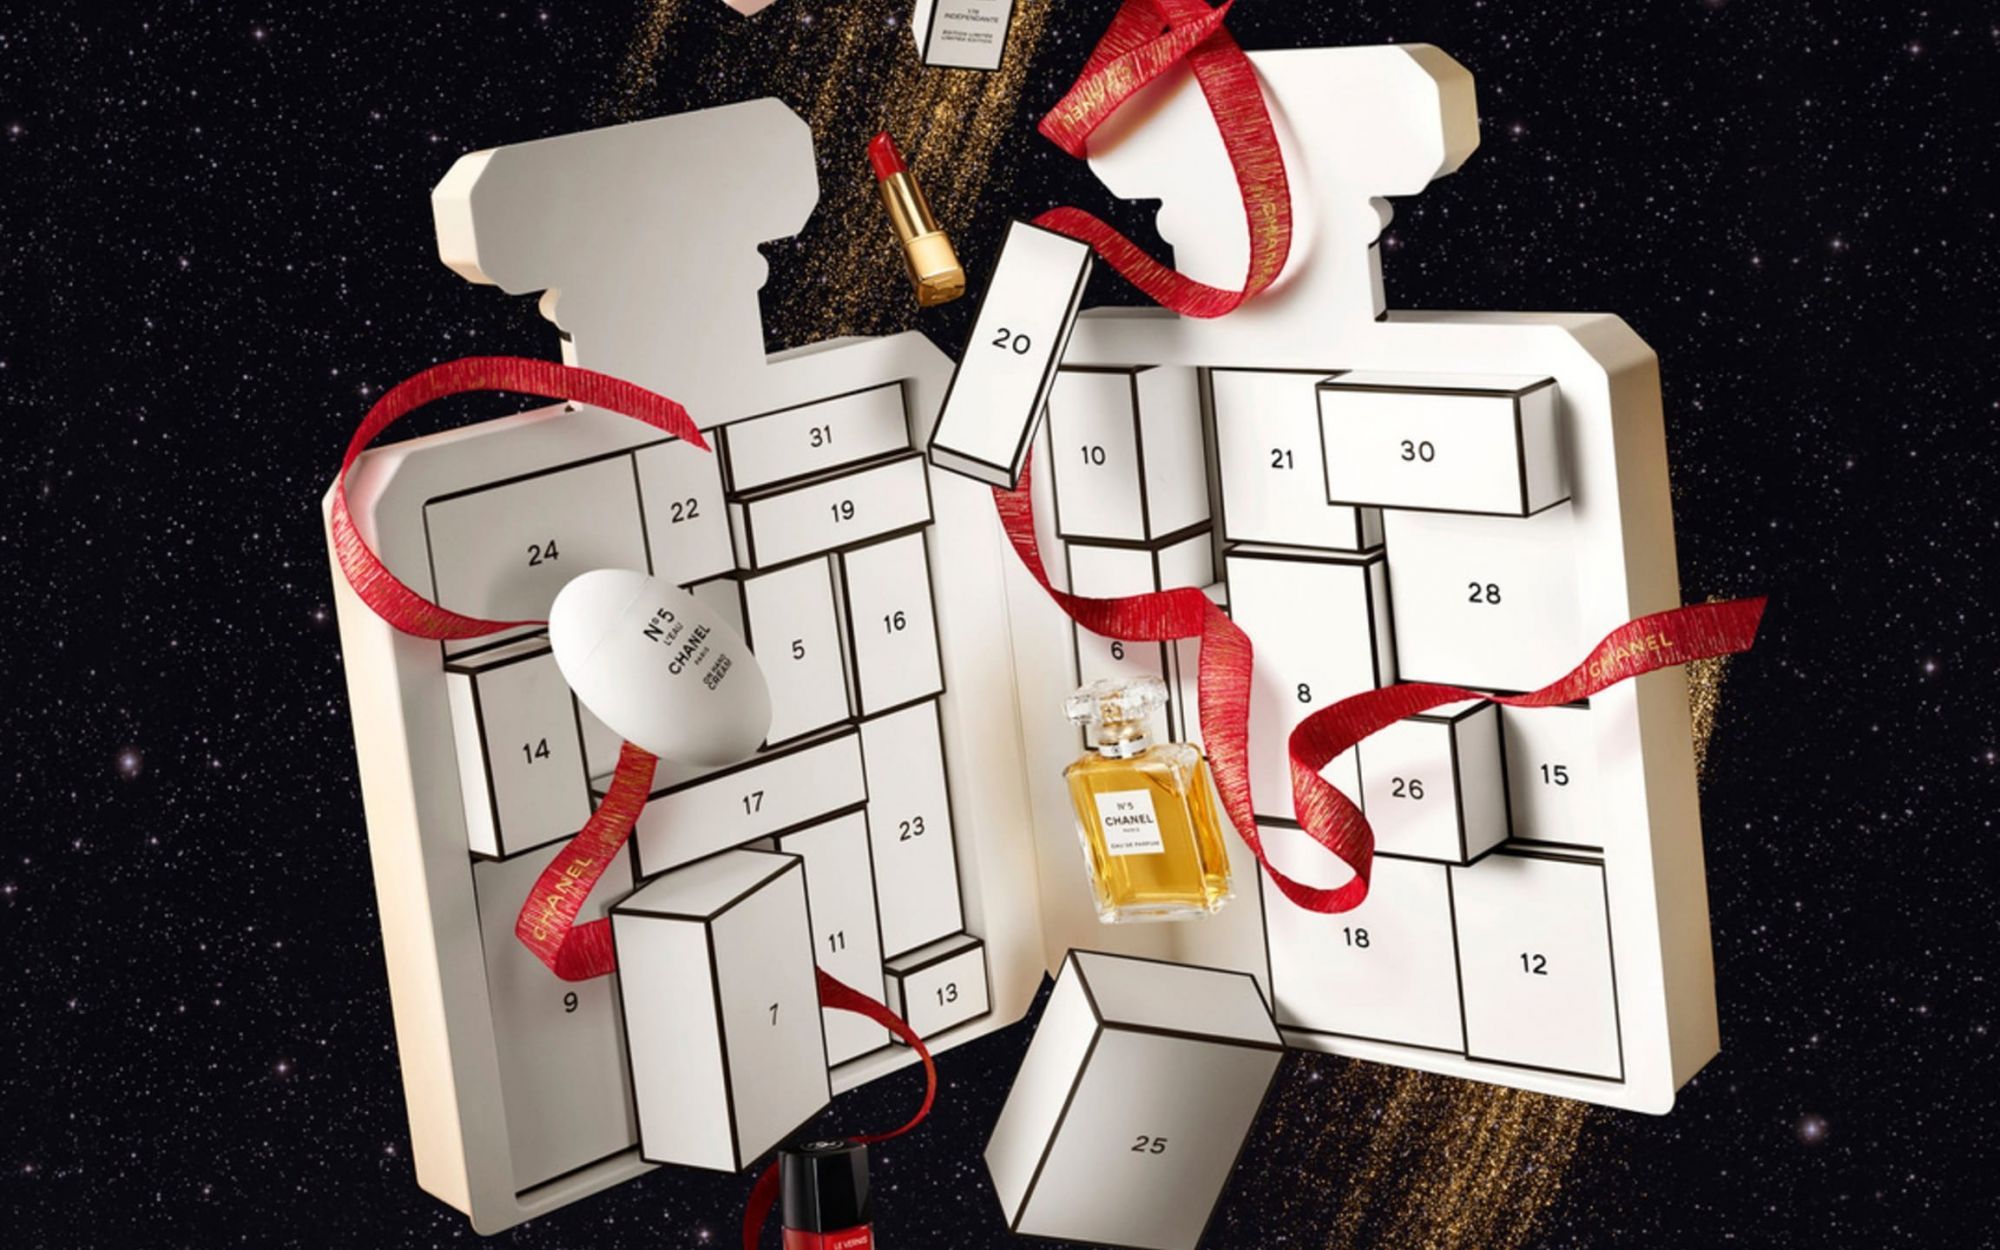 Why Chanel's advent calendar got everyone angry